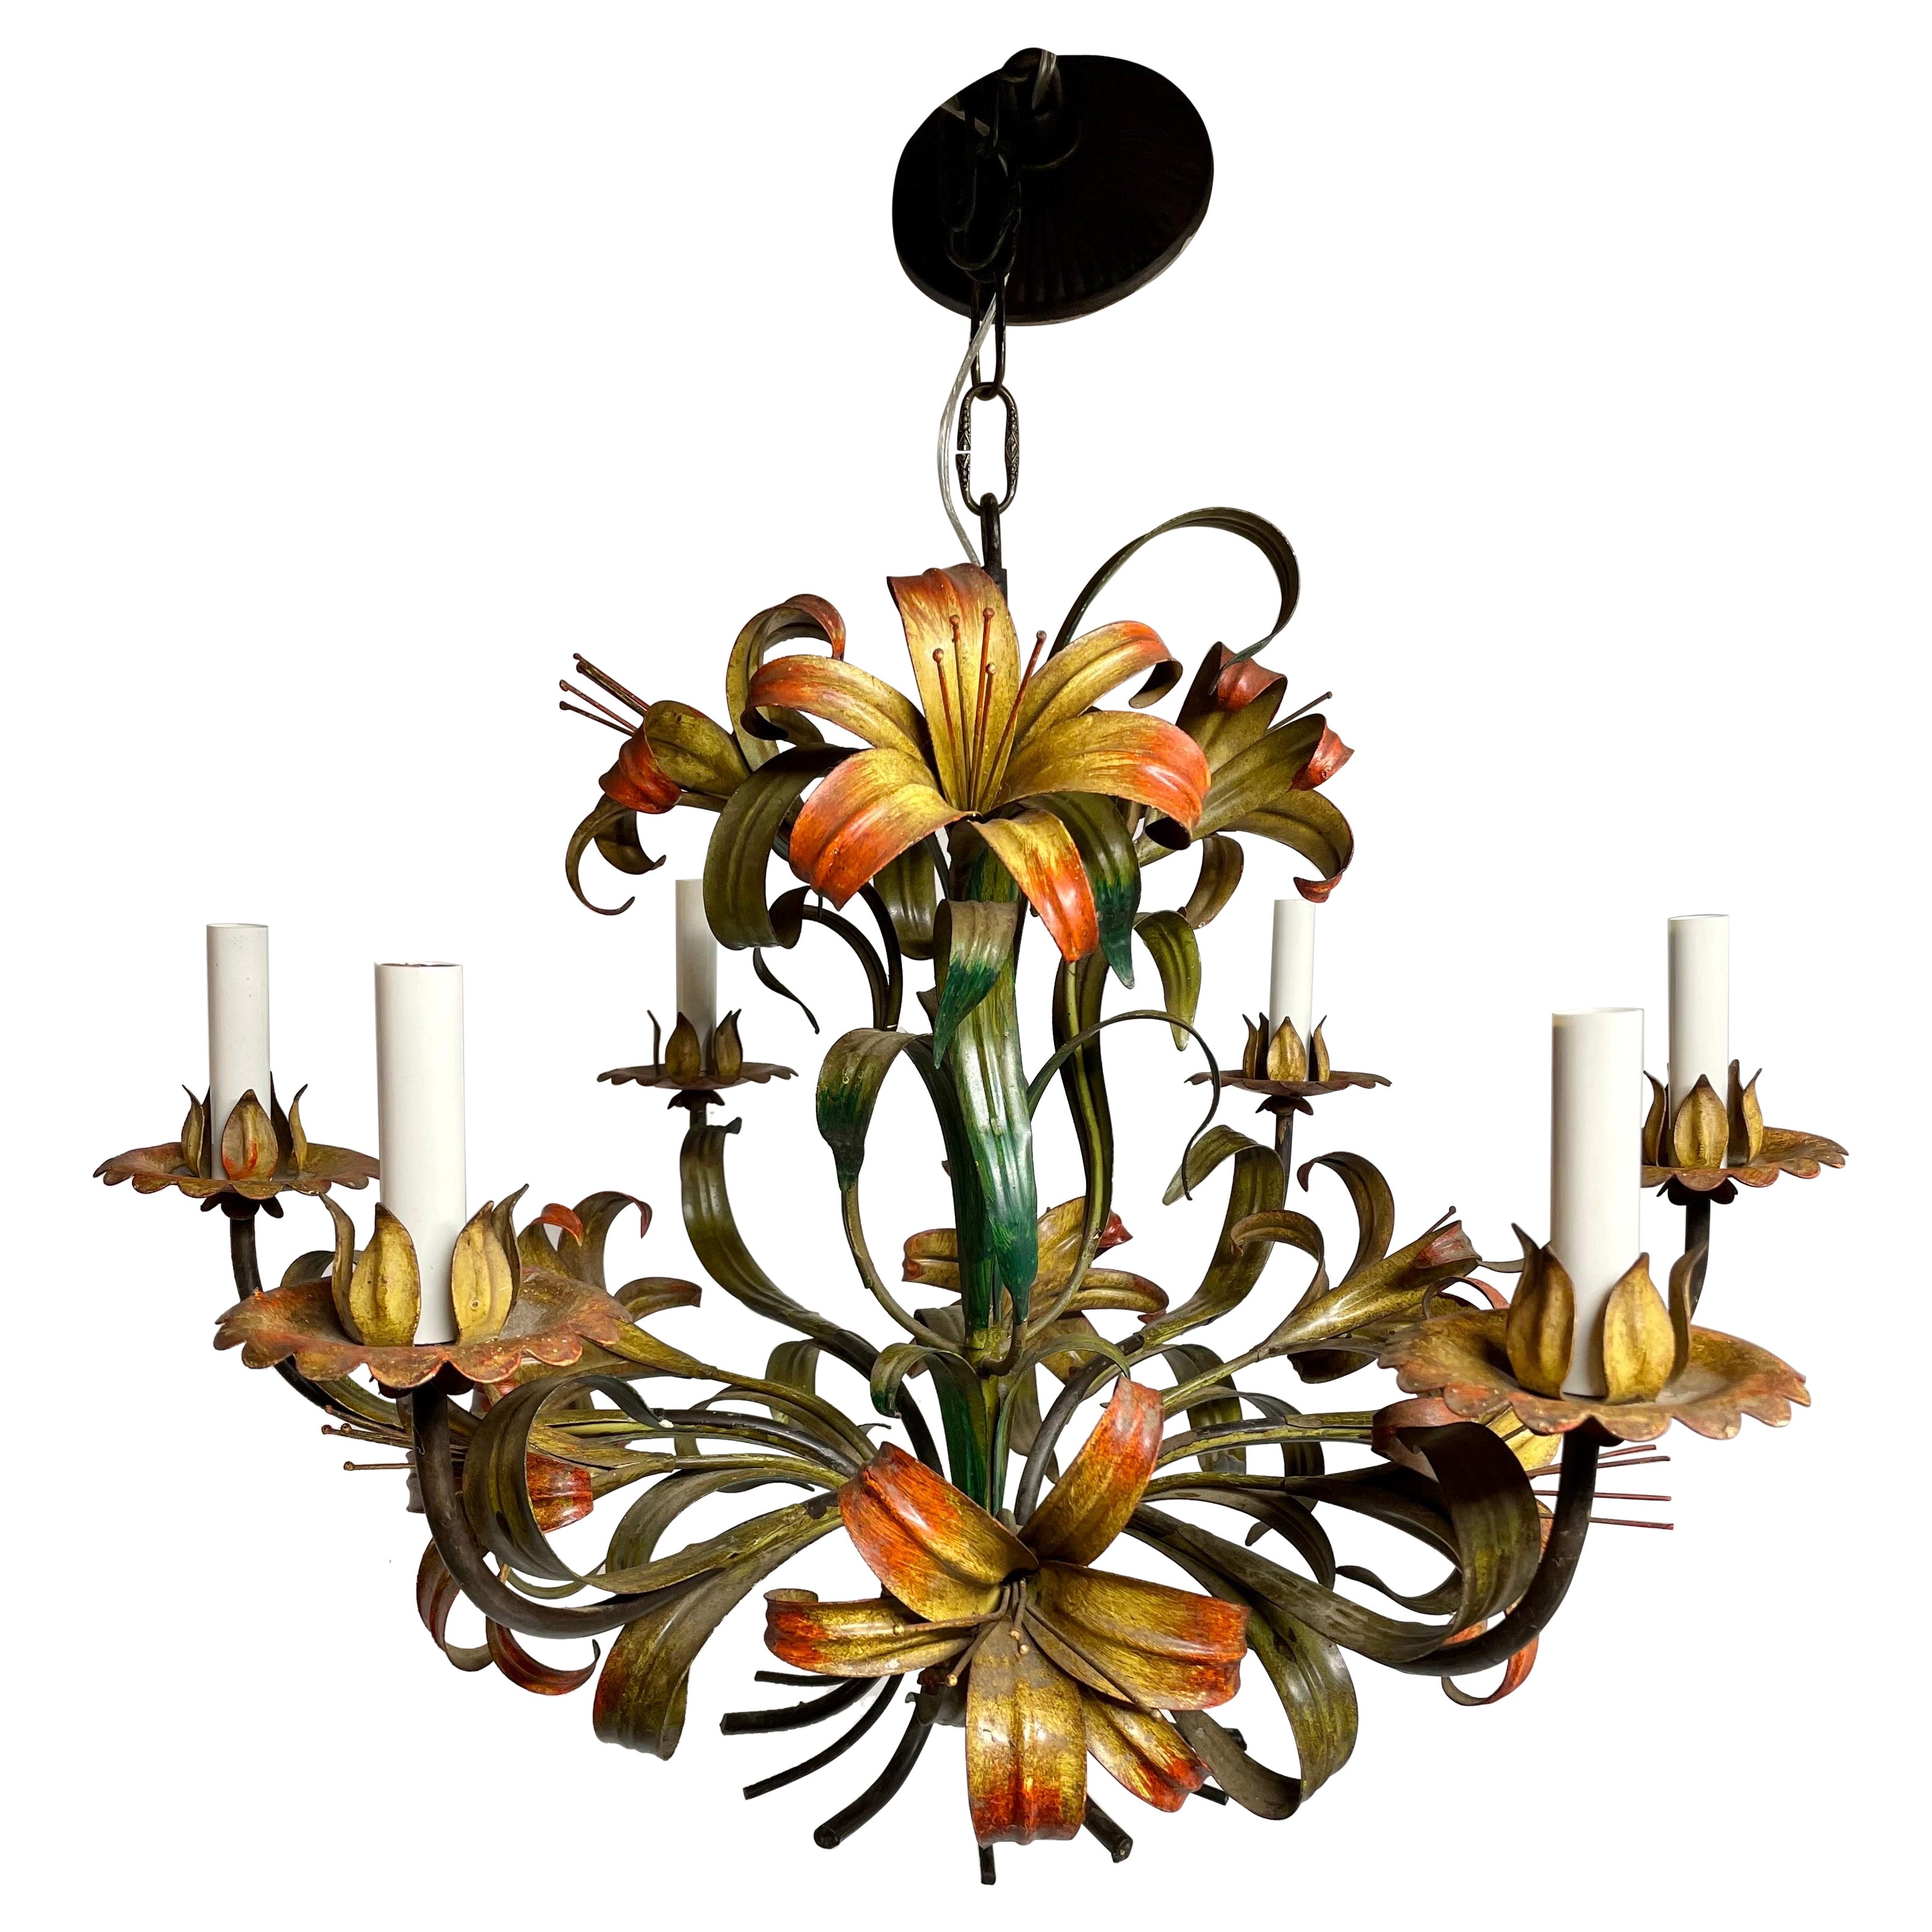 Italian Tole Floral Six Arm Chandelier with Lilies